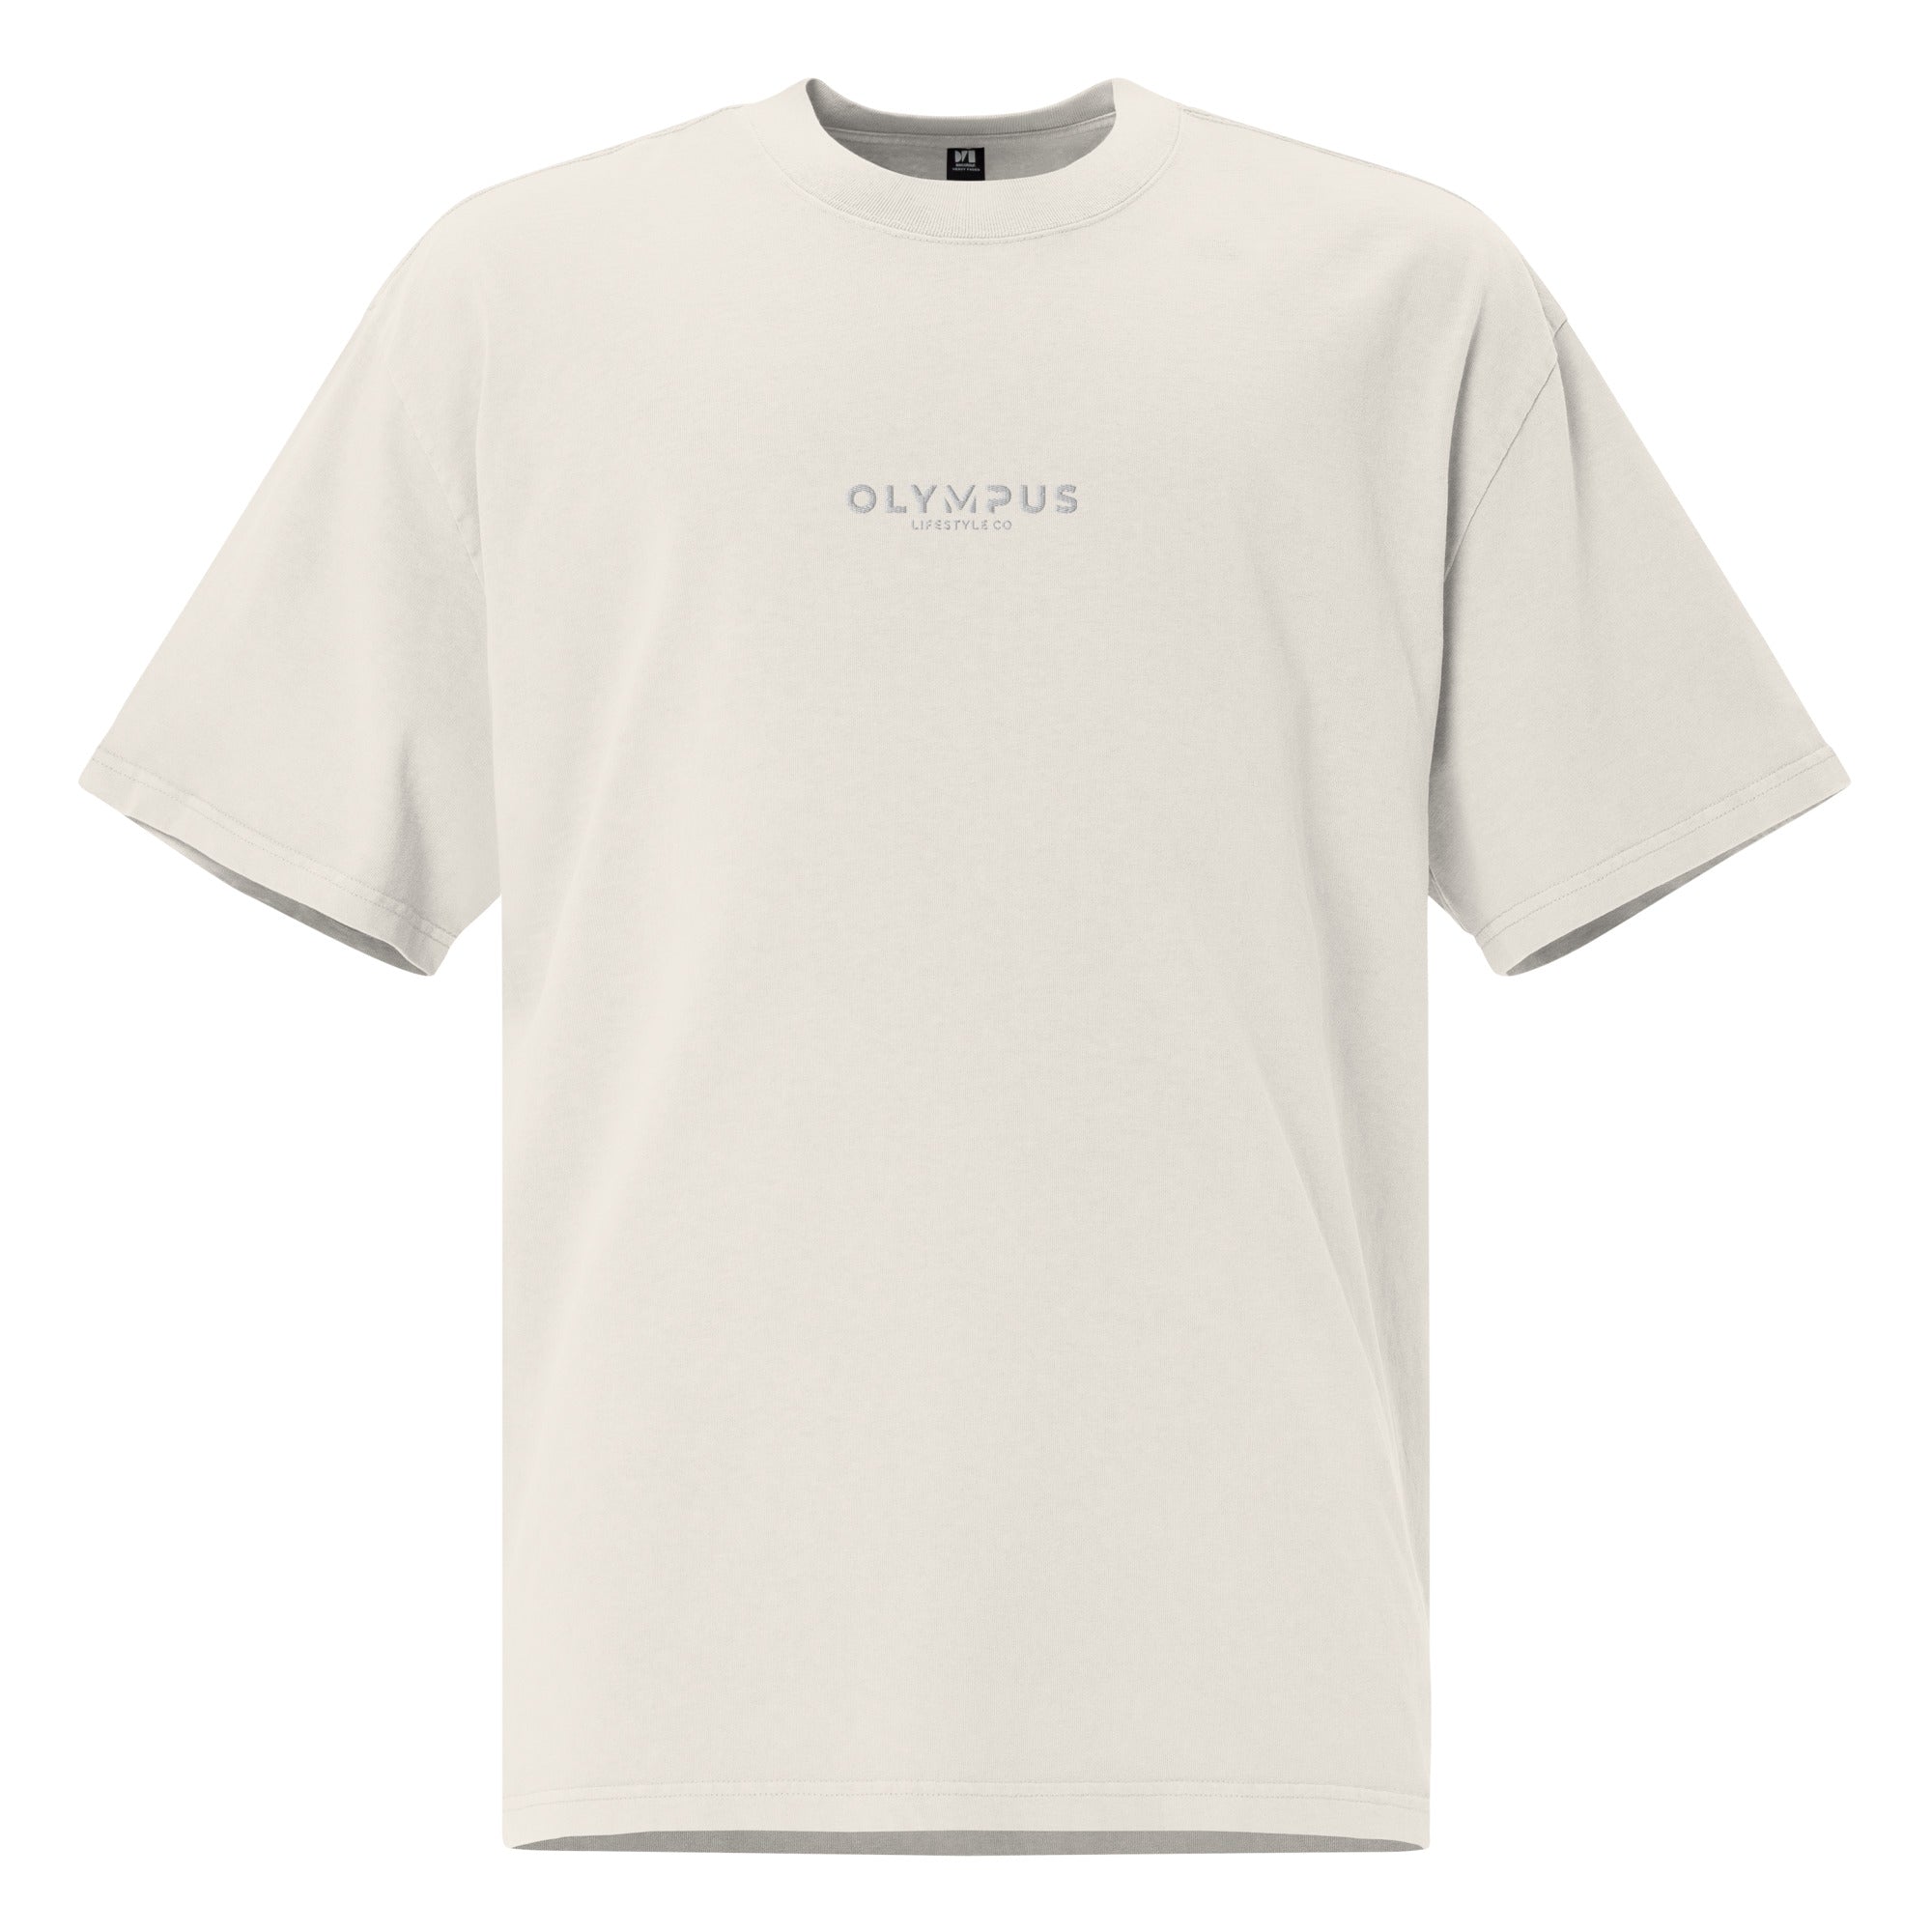 Olympus Men's Embroidered Oversized T-Shirt White Text Logo